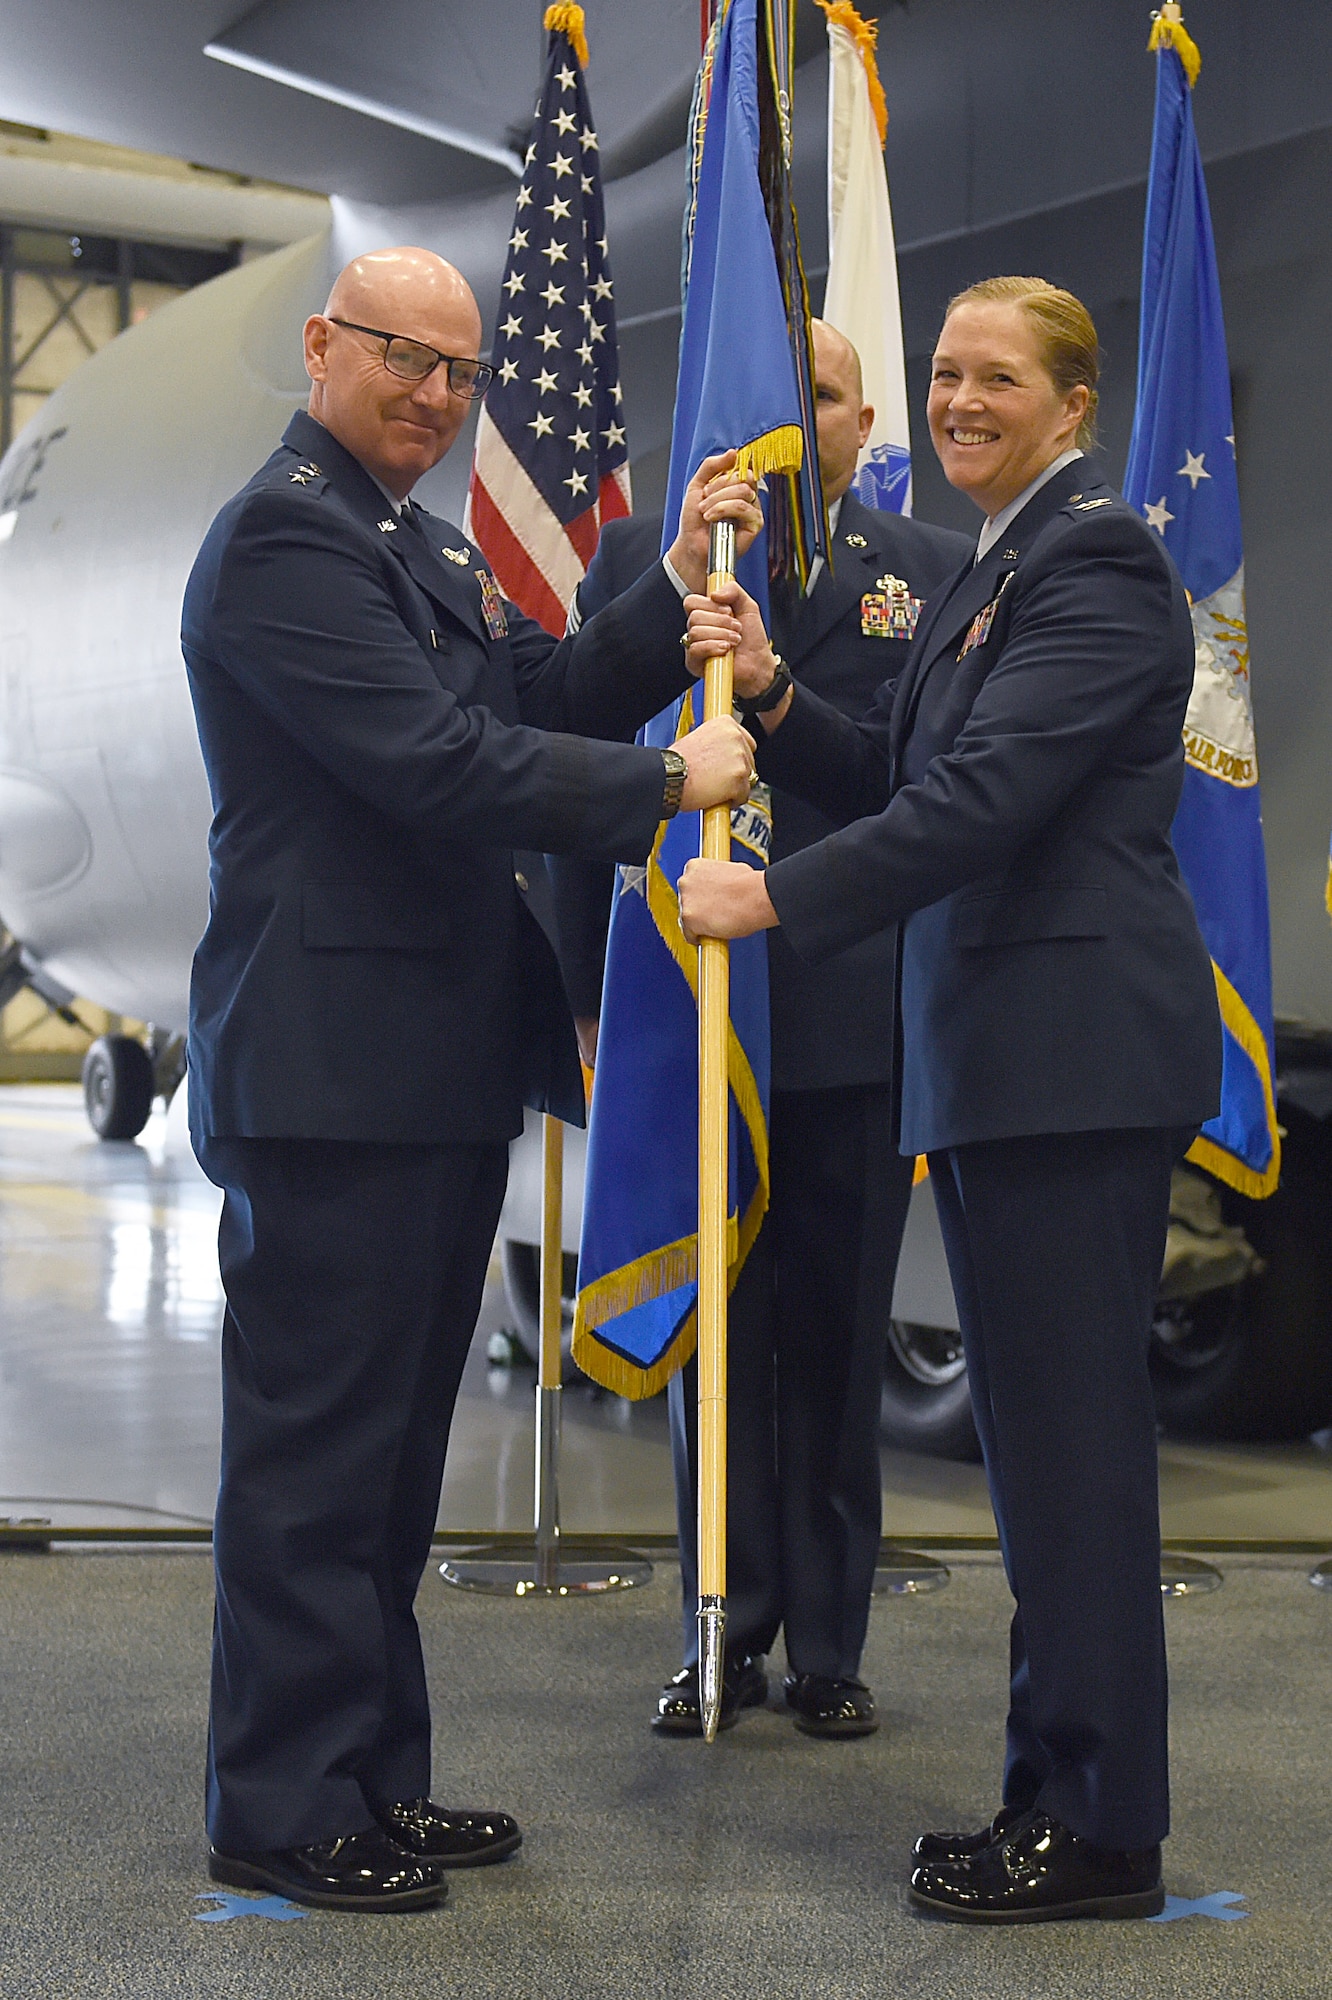 Maj. Gen. Sam Barrett, 18th Air Force commander, hands off the guidon to Col. Erin Staine-Pyne, 62nd Airlift Wing commander, on Joint Base Lewis-McChord, Wash., Jan 10, 2020.